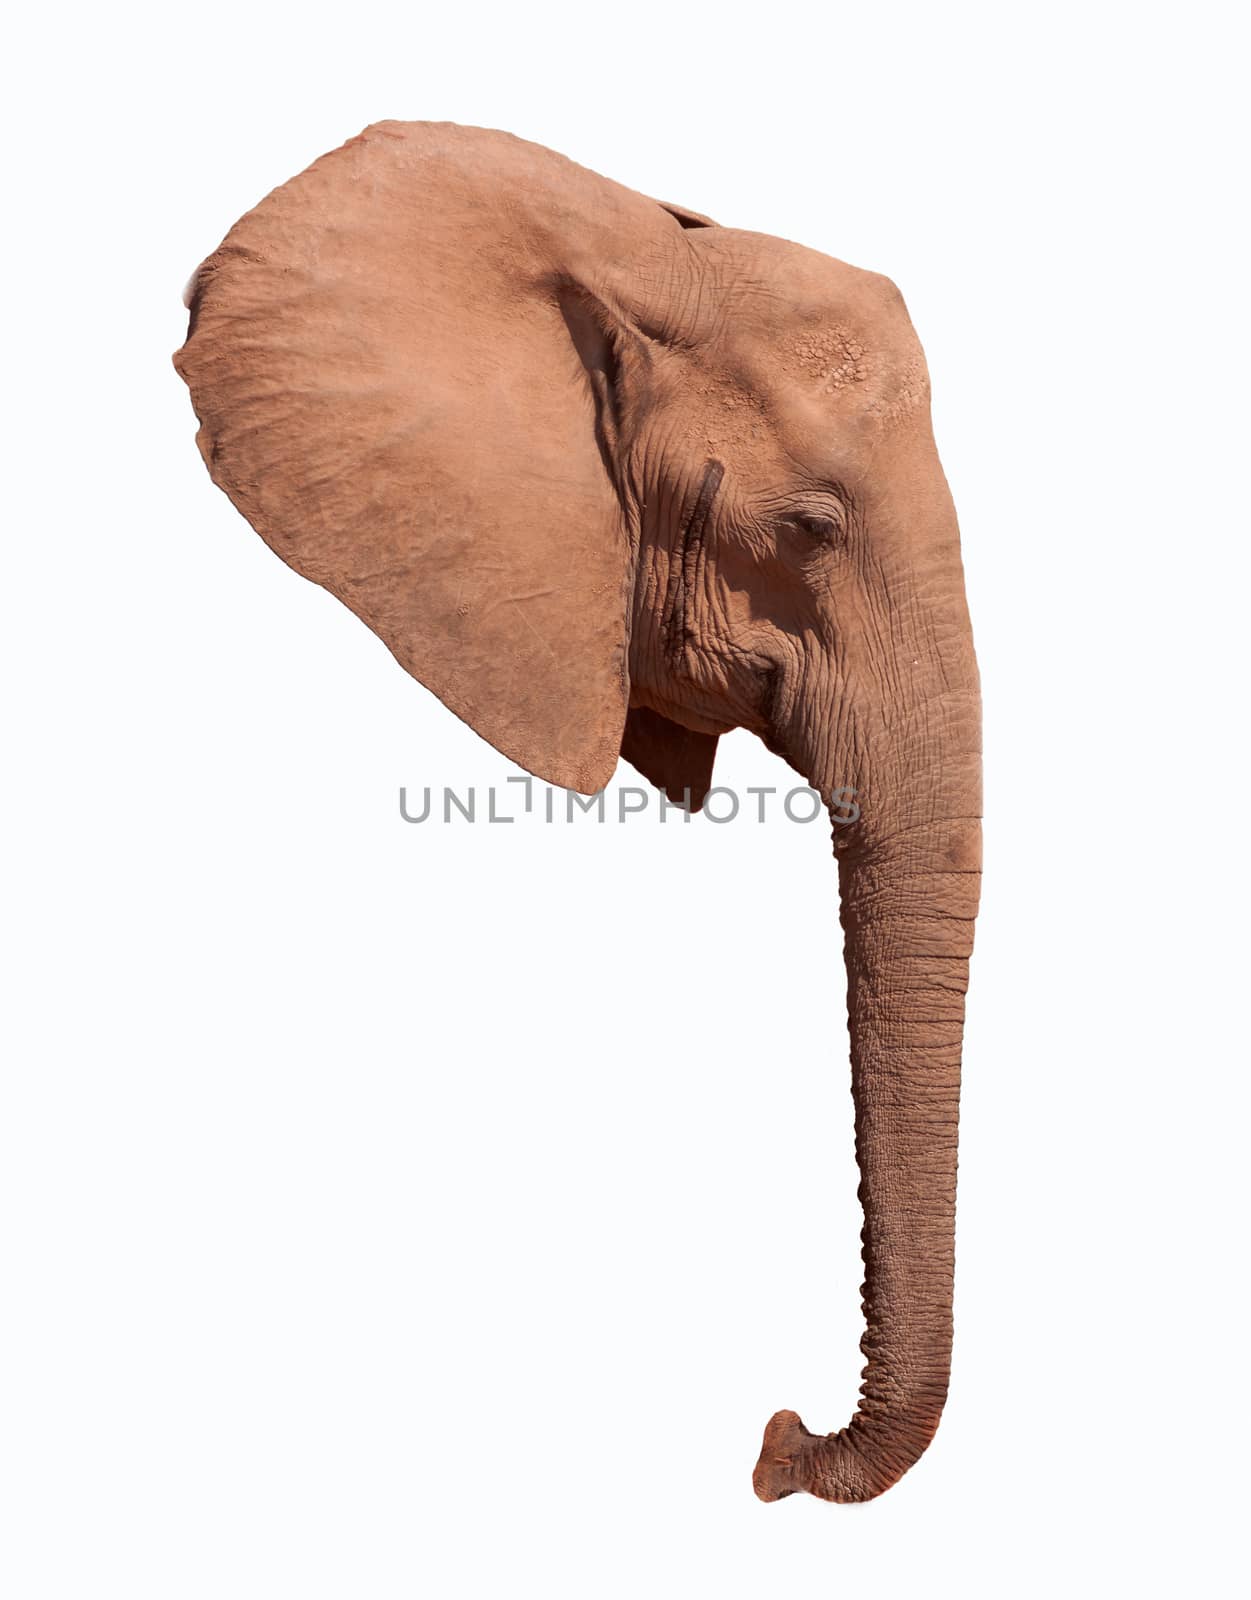 Elephant head ear and trunk isolated on a white background